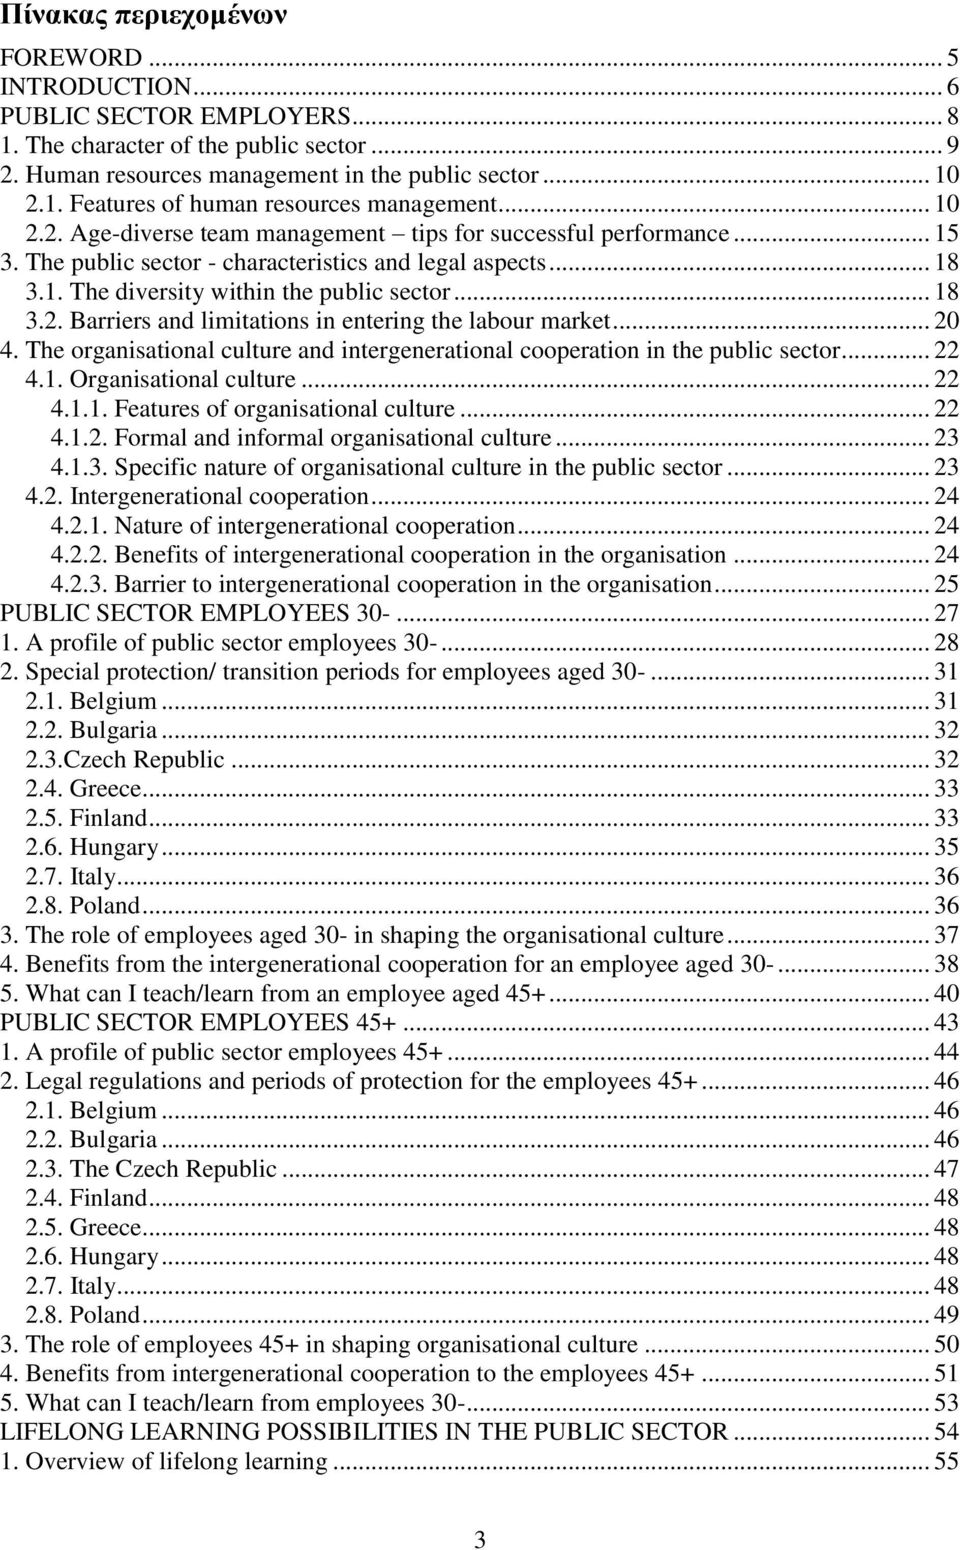 .. 20 4. The organisational culture and intergenerational cooperation in the public sector... 22 4.1. Organisational culture... 22 4.1.1. Features of organisational culture... 22 4.1.2. Formal and informal organisational culture.